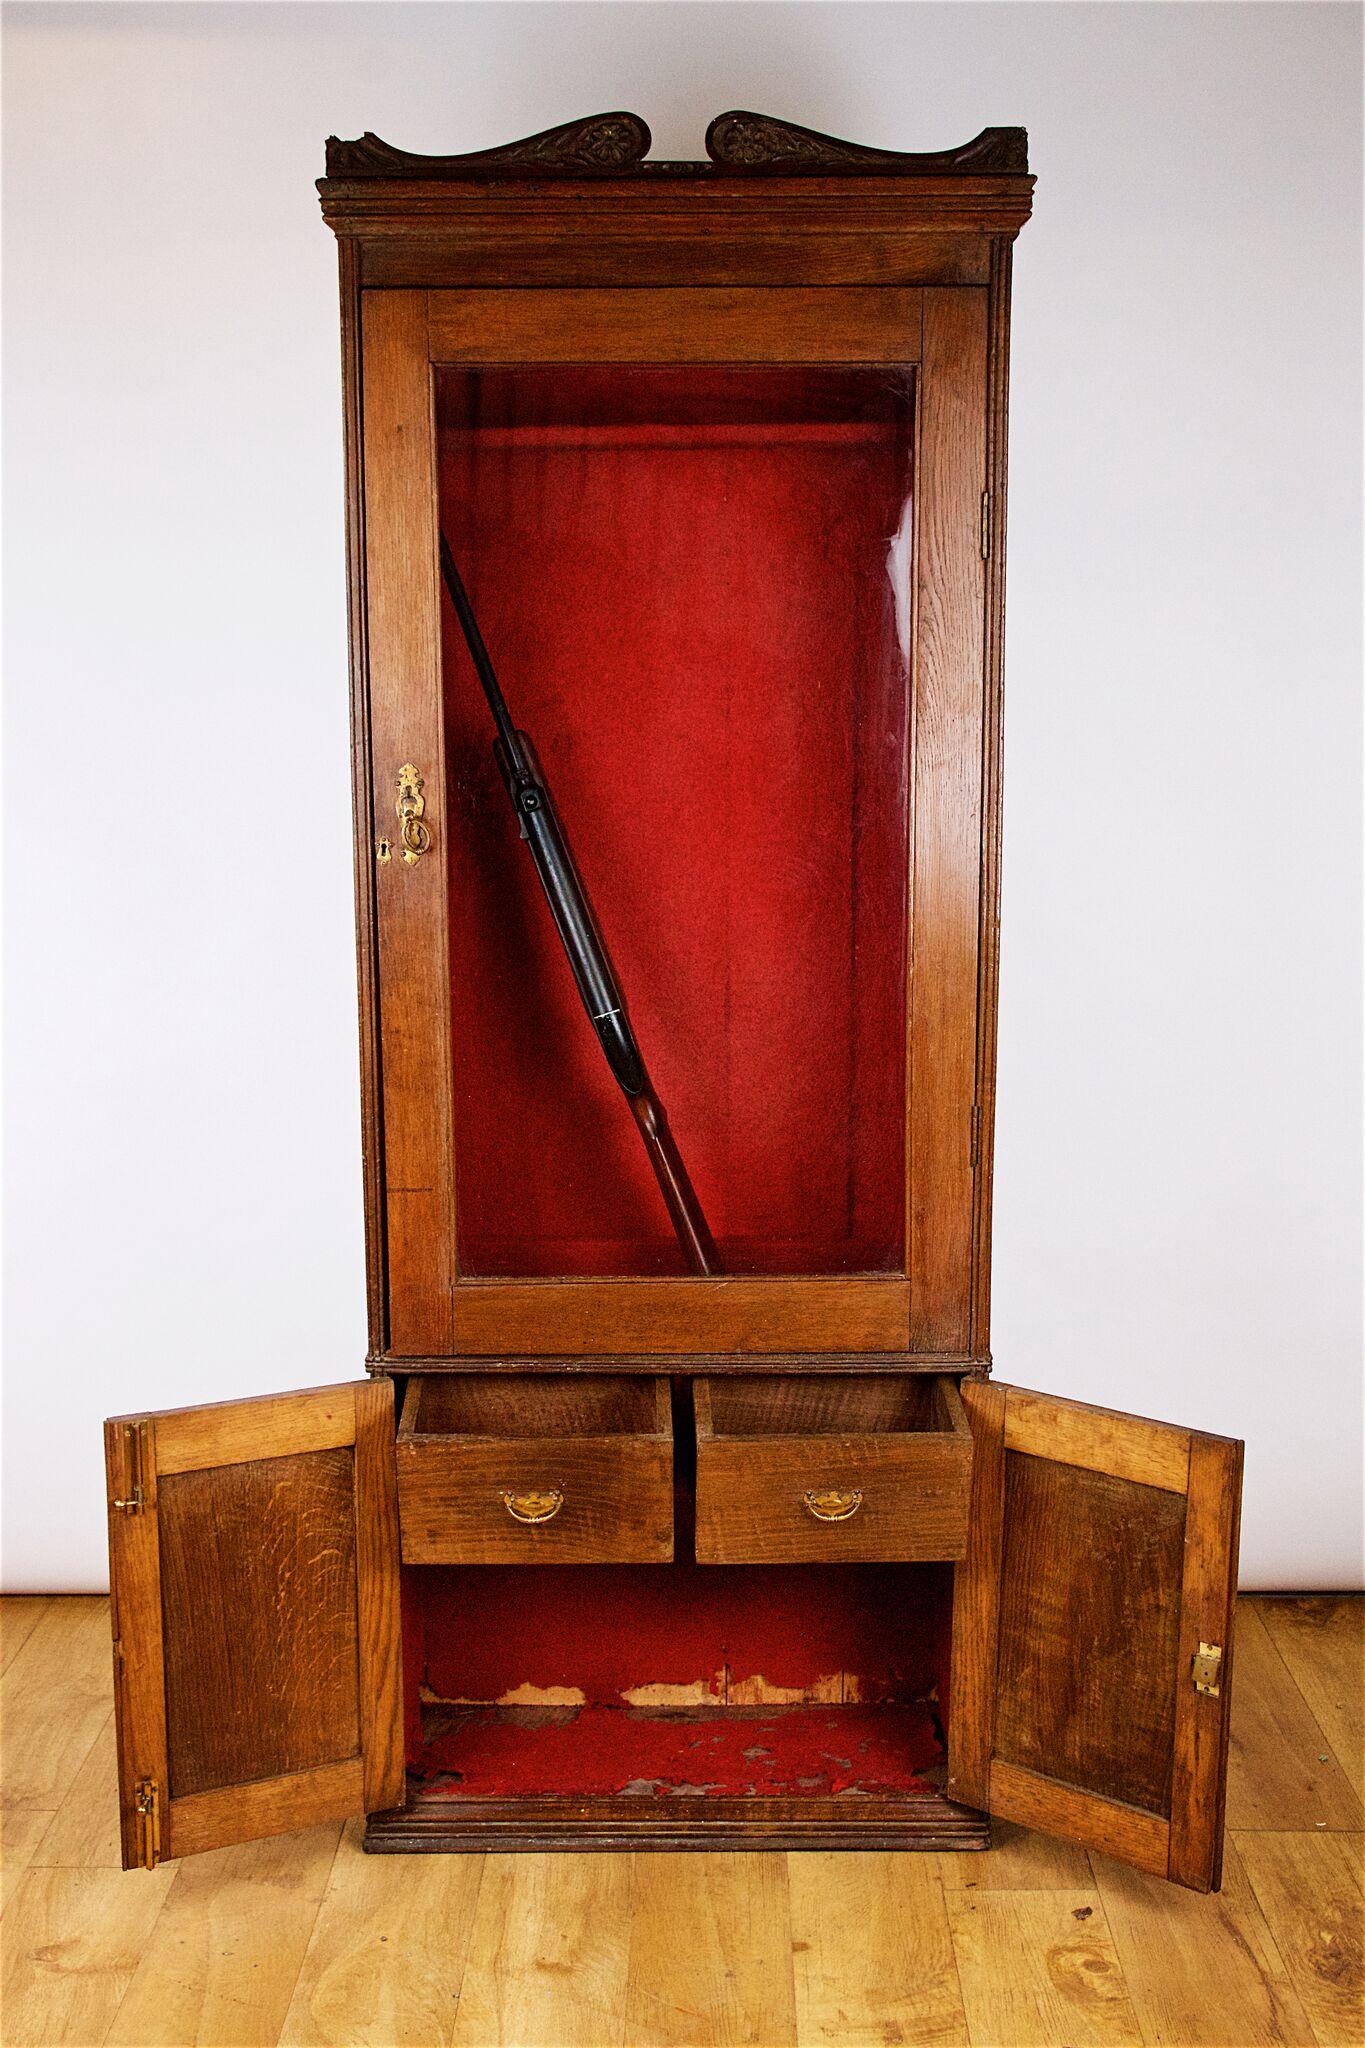 Late 19th century English oak gun cabinet to hold 6 guns with 2 internal drawers for cartridges, circa 1900. 
Possibly made by Army and Navy Stores, London.